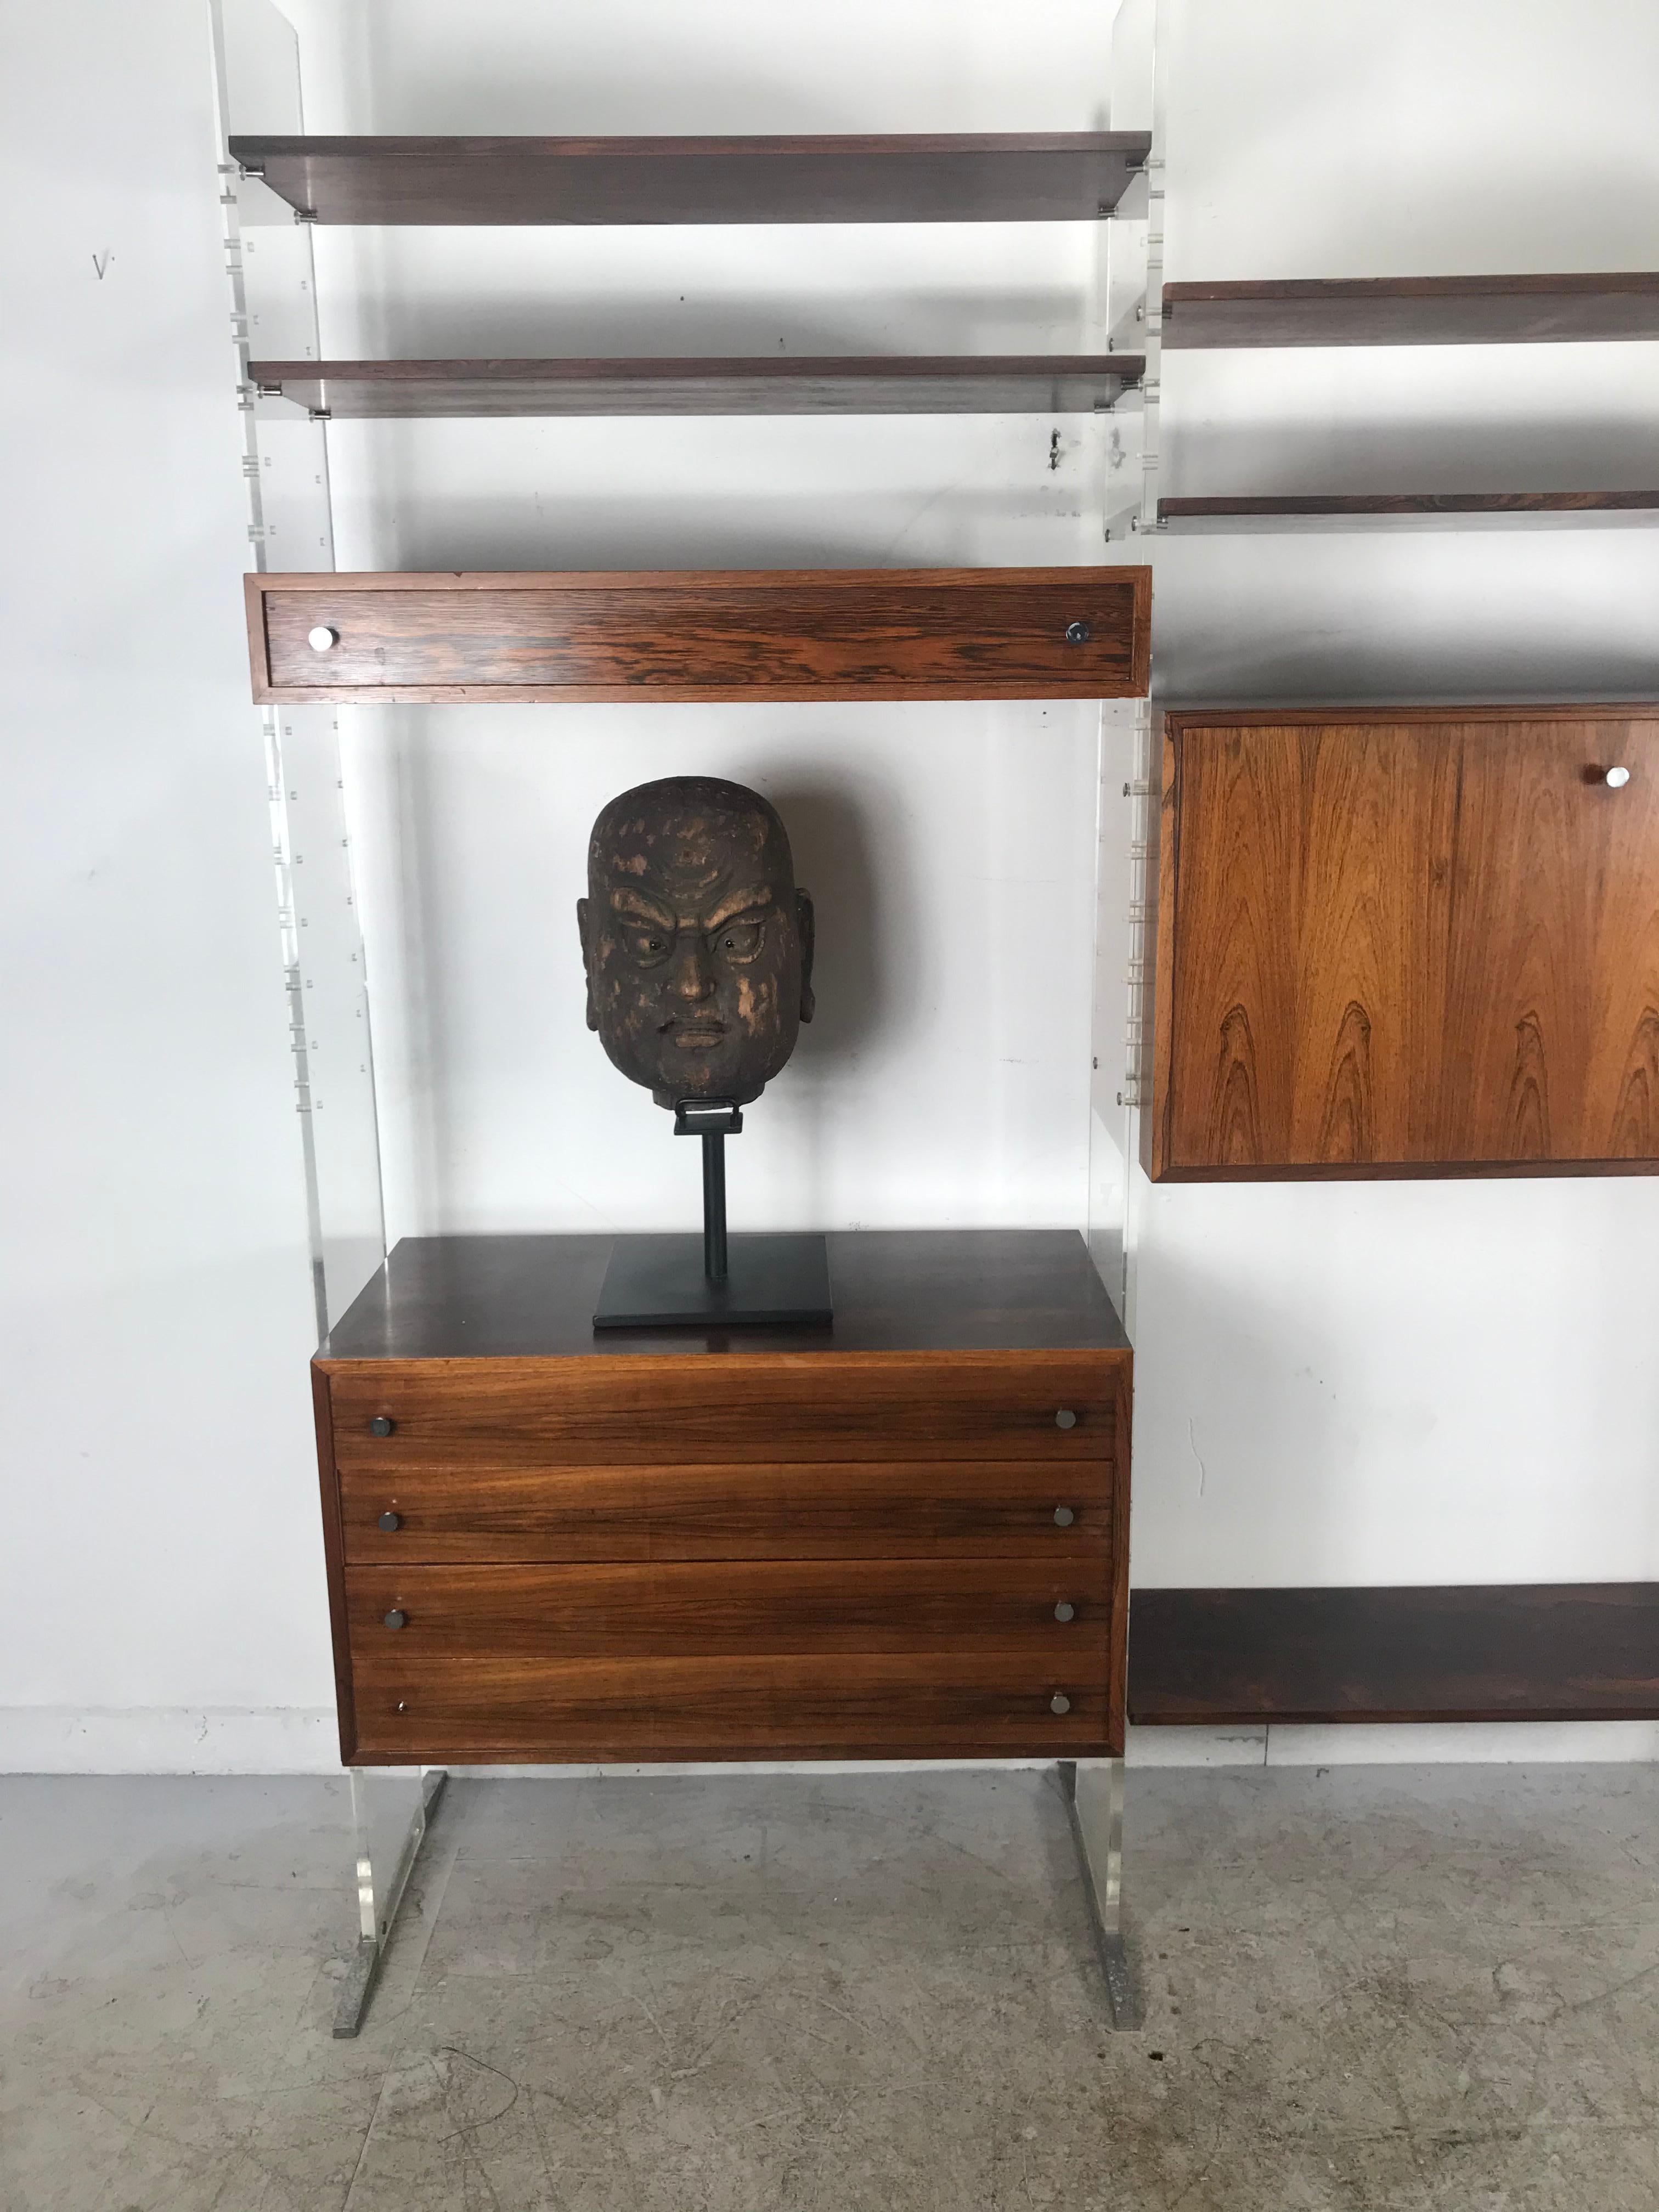 Poul Nørreklit Wall Unit in Plexiglass / Lucite and Rosewood, Denmark, 1960s For Sale 1